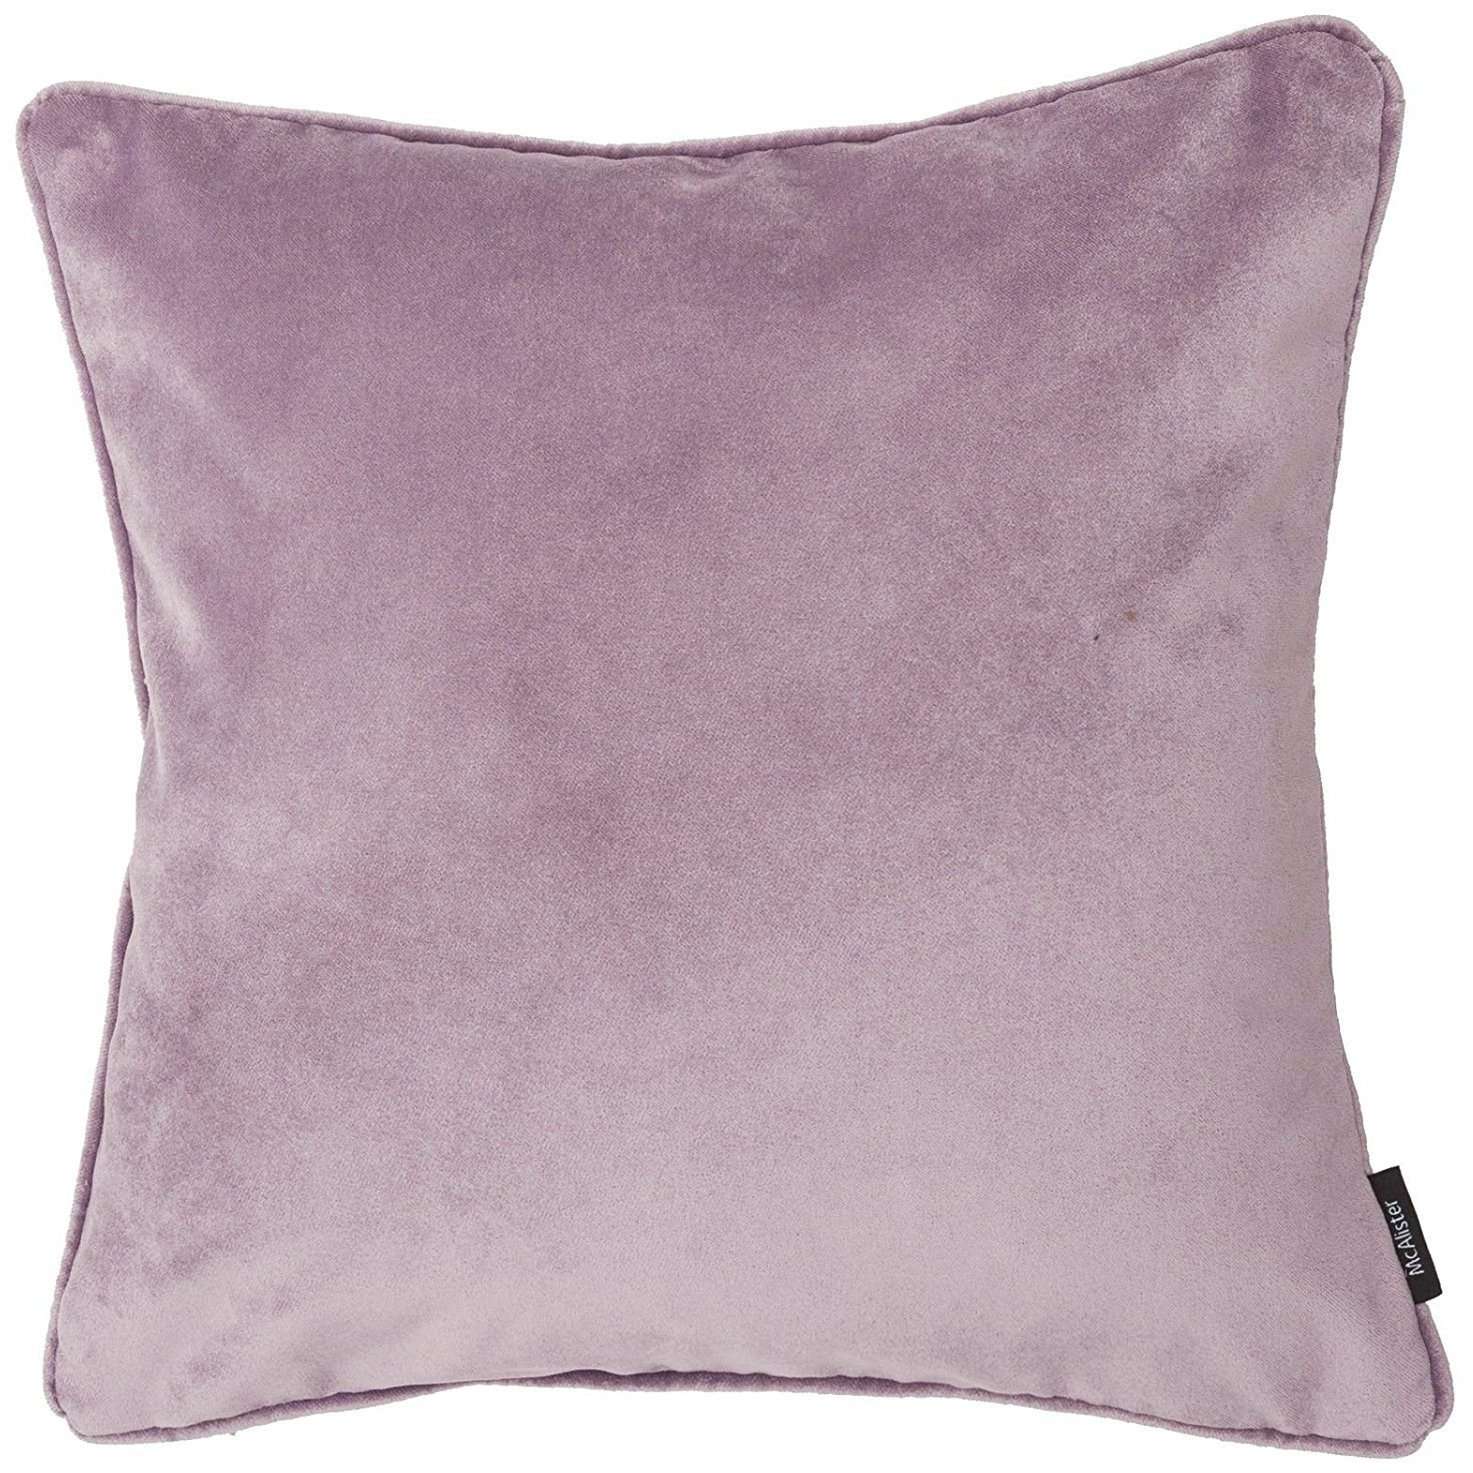 McAlister Textiles Matt Lilac Purple Piped Velvet Cushion Cushions and Covers Cover Only 43cm x 43cm 